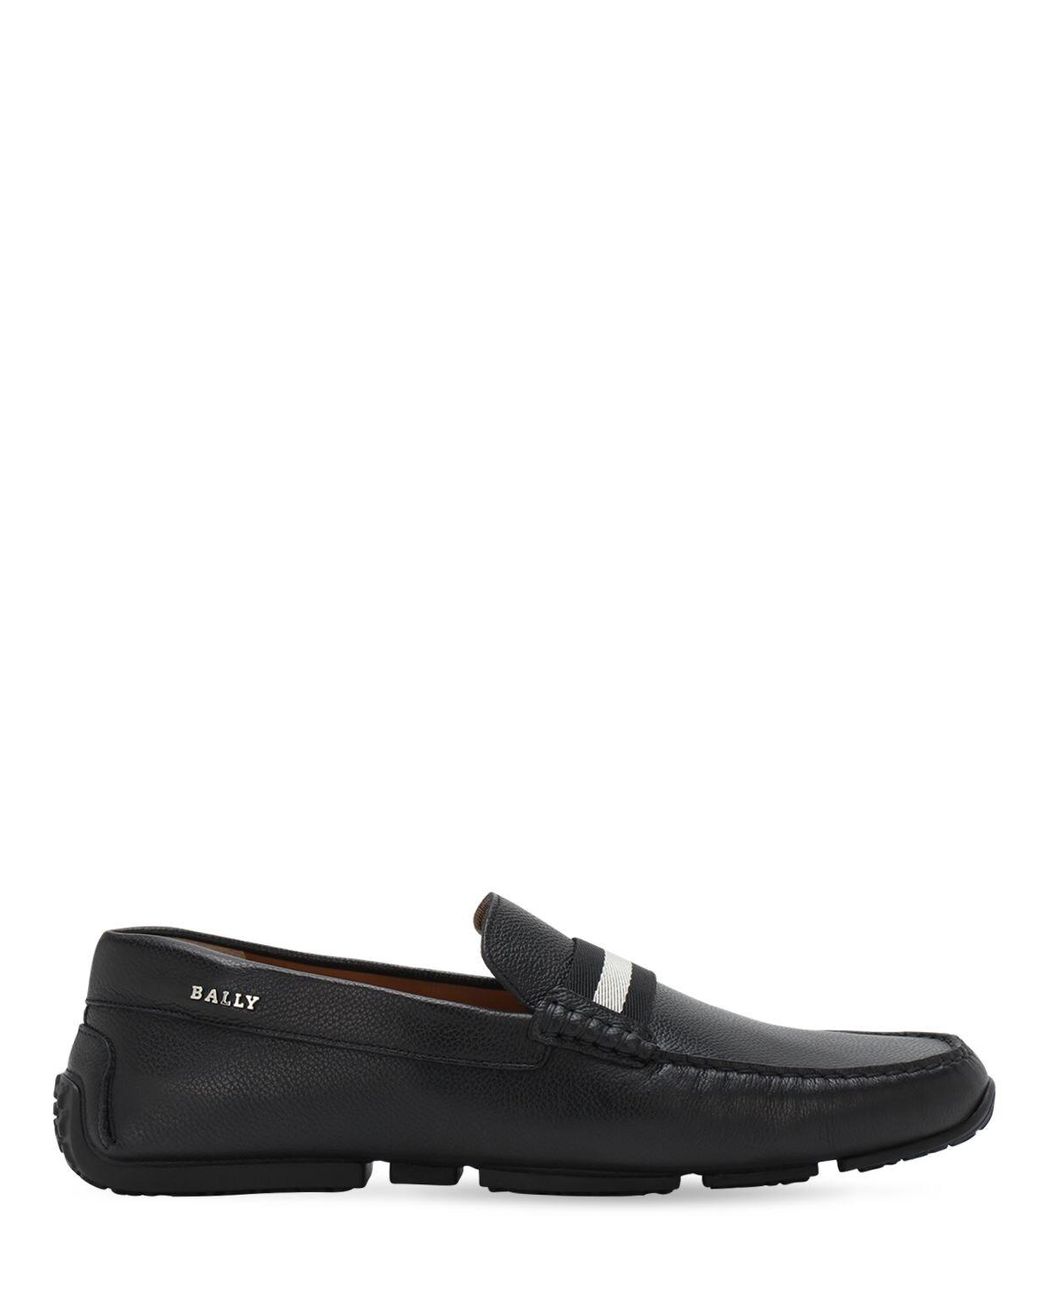 Bally Driver Leather Loafers W/ Stripe in Black for Men - Lyst